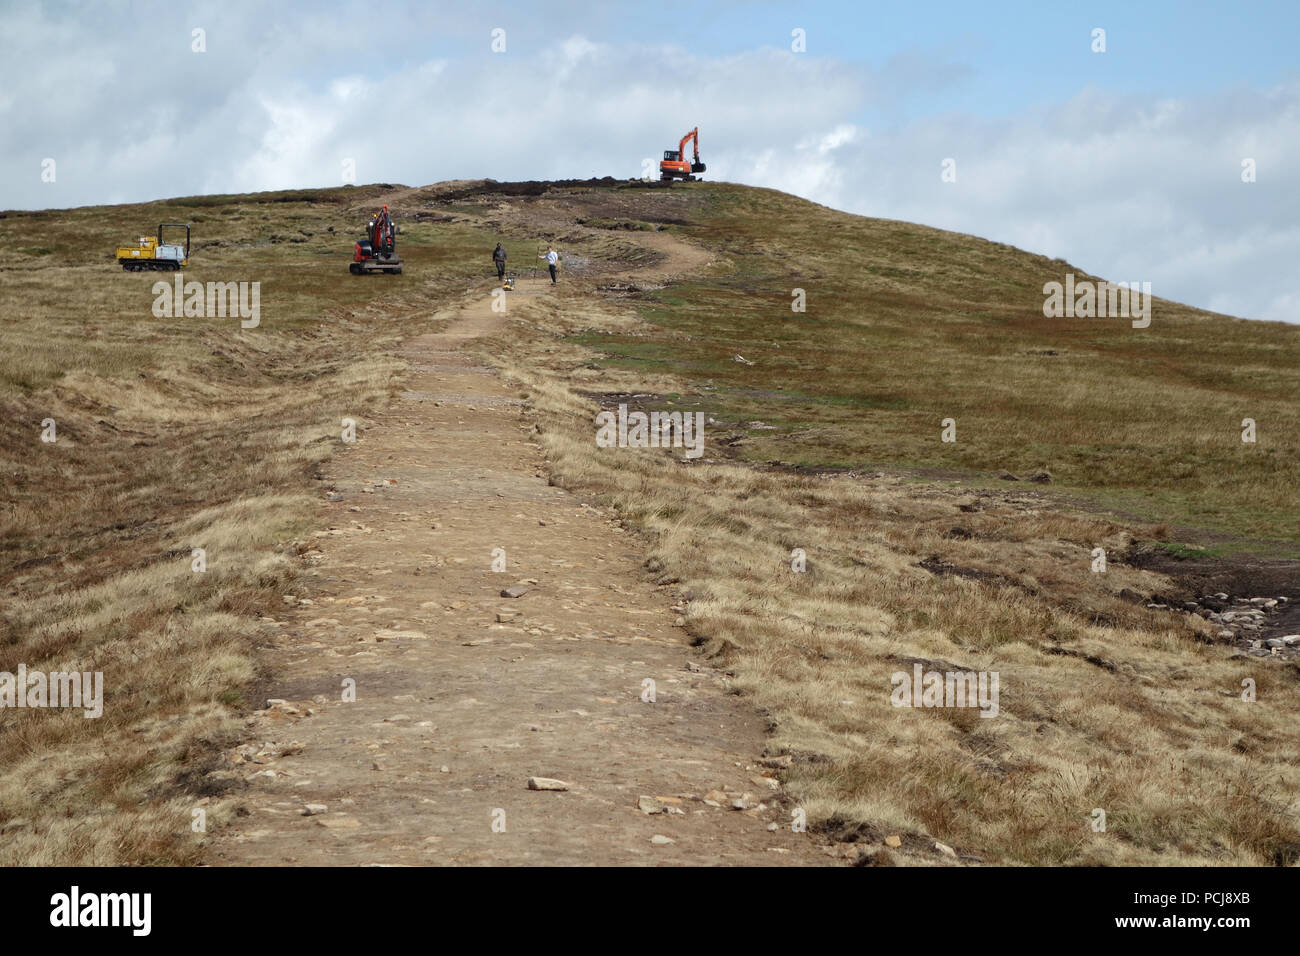 Workmen Working on the New Path Being Constructed Leading up to the Trig Column on the Summit of Pendle Hill, Lancashire, England, UK Stock Photo